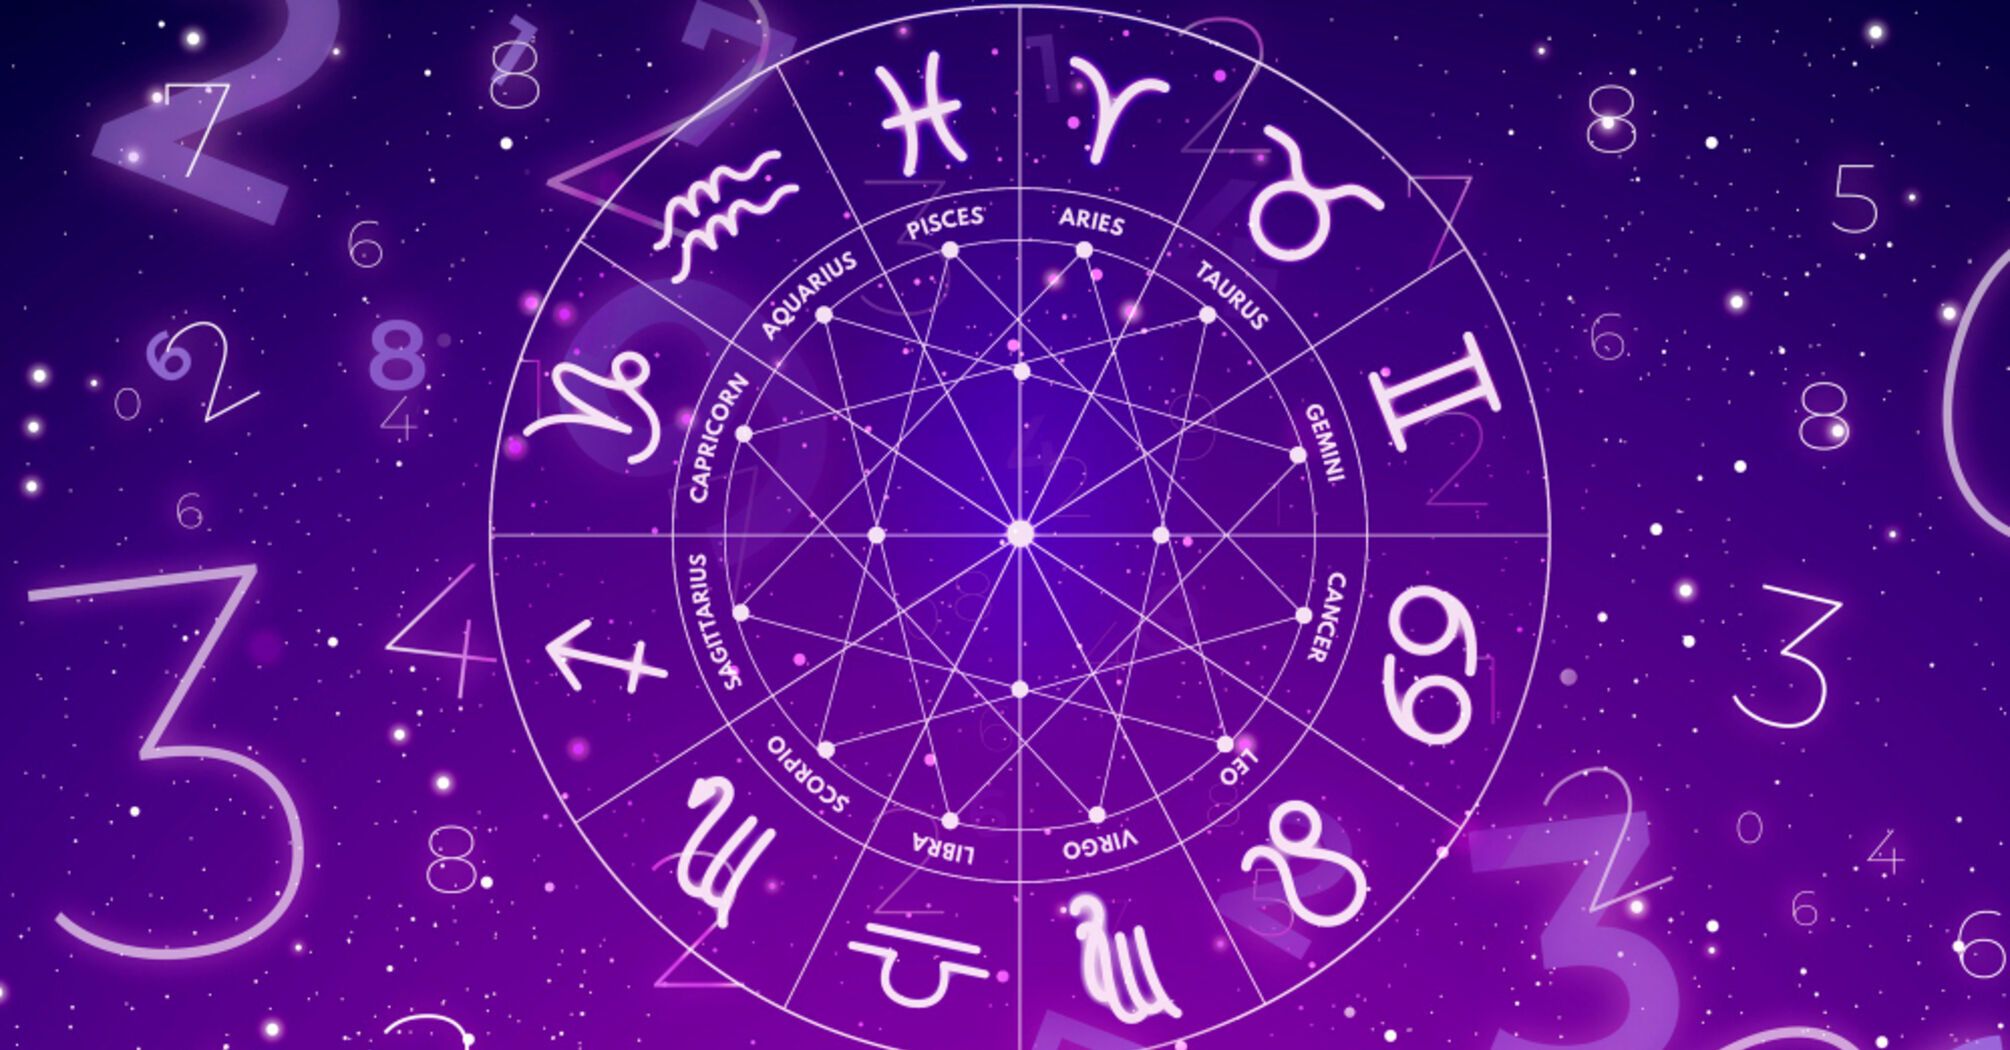 It is necessary to focus on personal well-being: horoscope for all zodiac signs for April 23